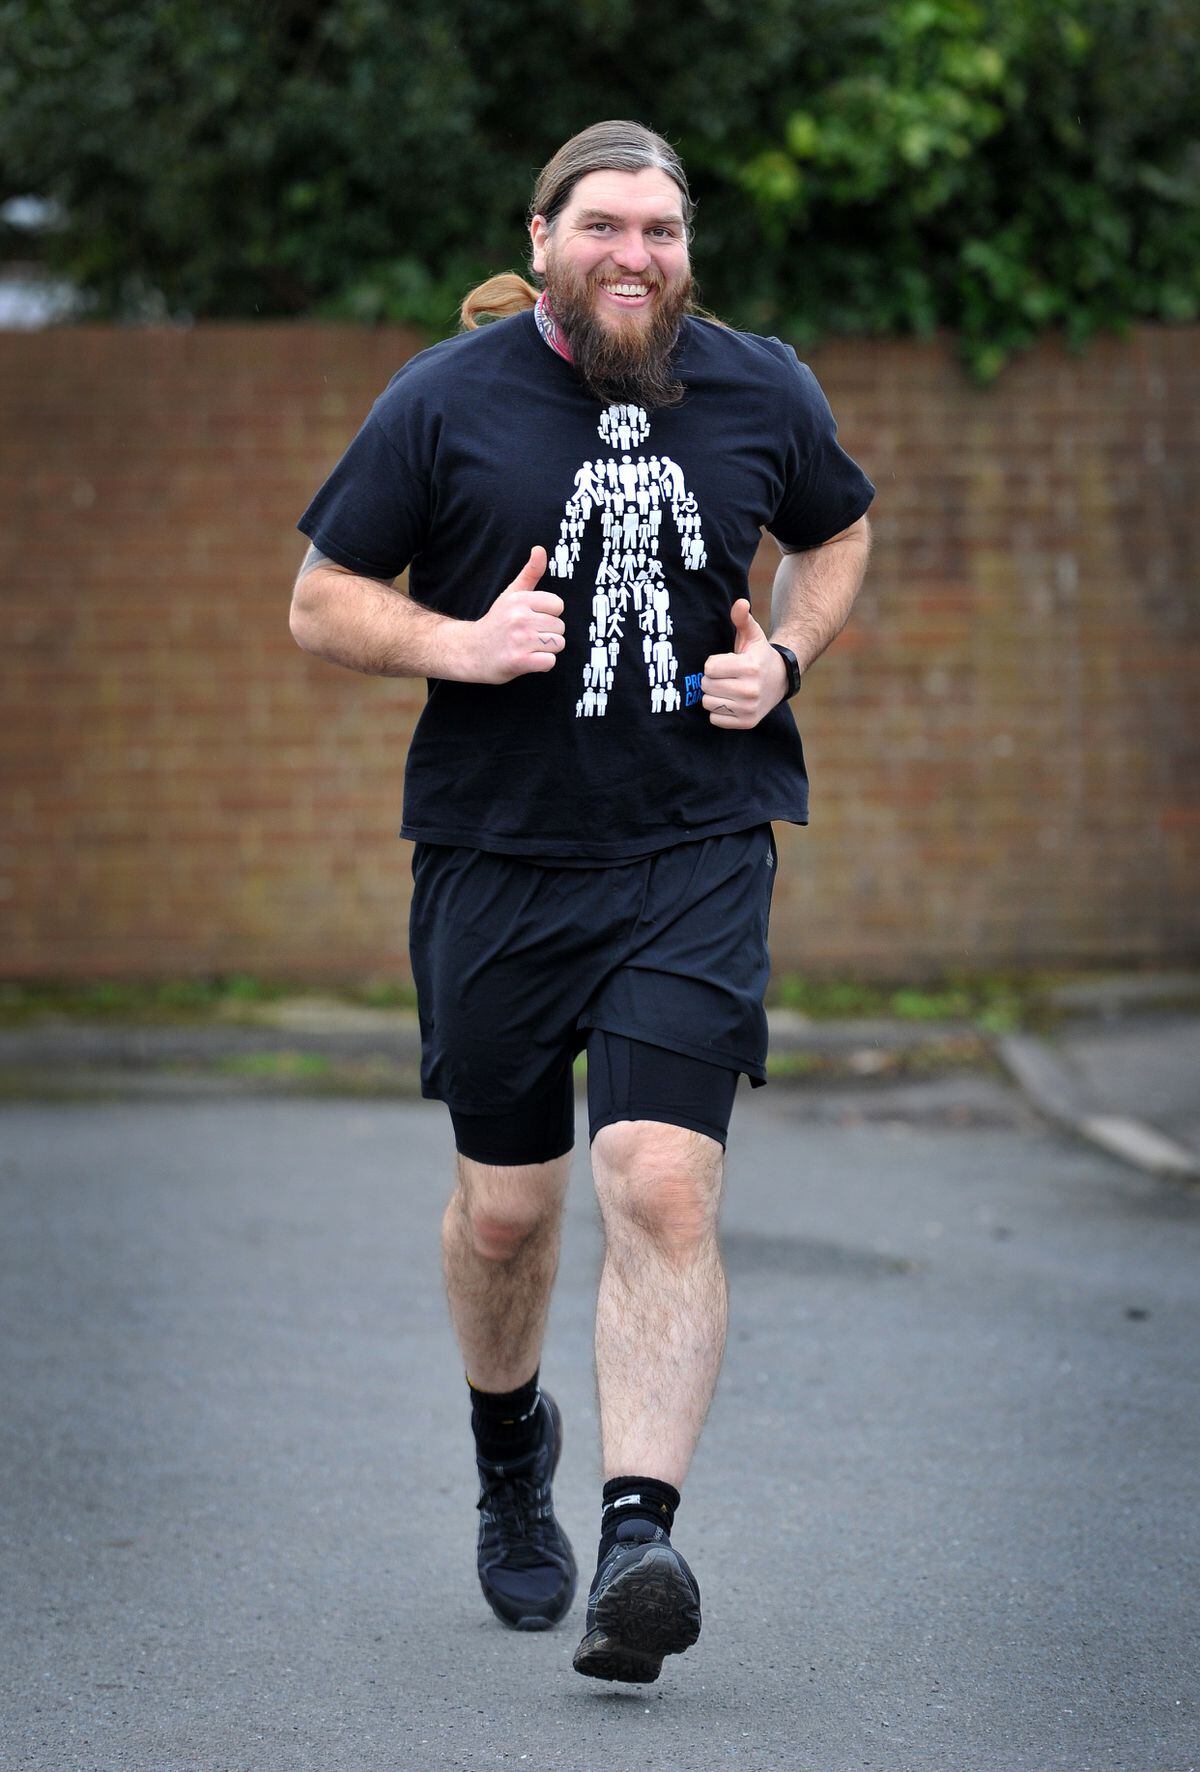 Mark Shingler from Walsall Wood took part in a virtual challenge set to run 26.2 miles throughout January